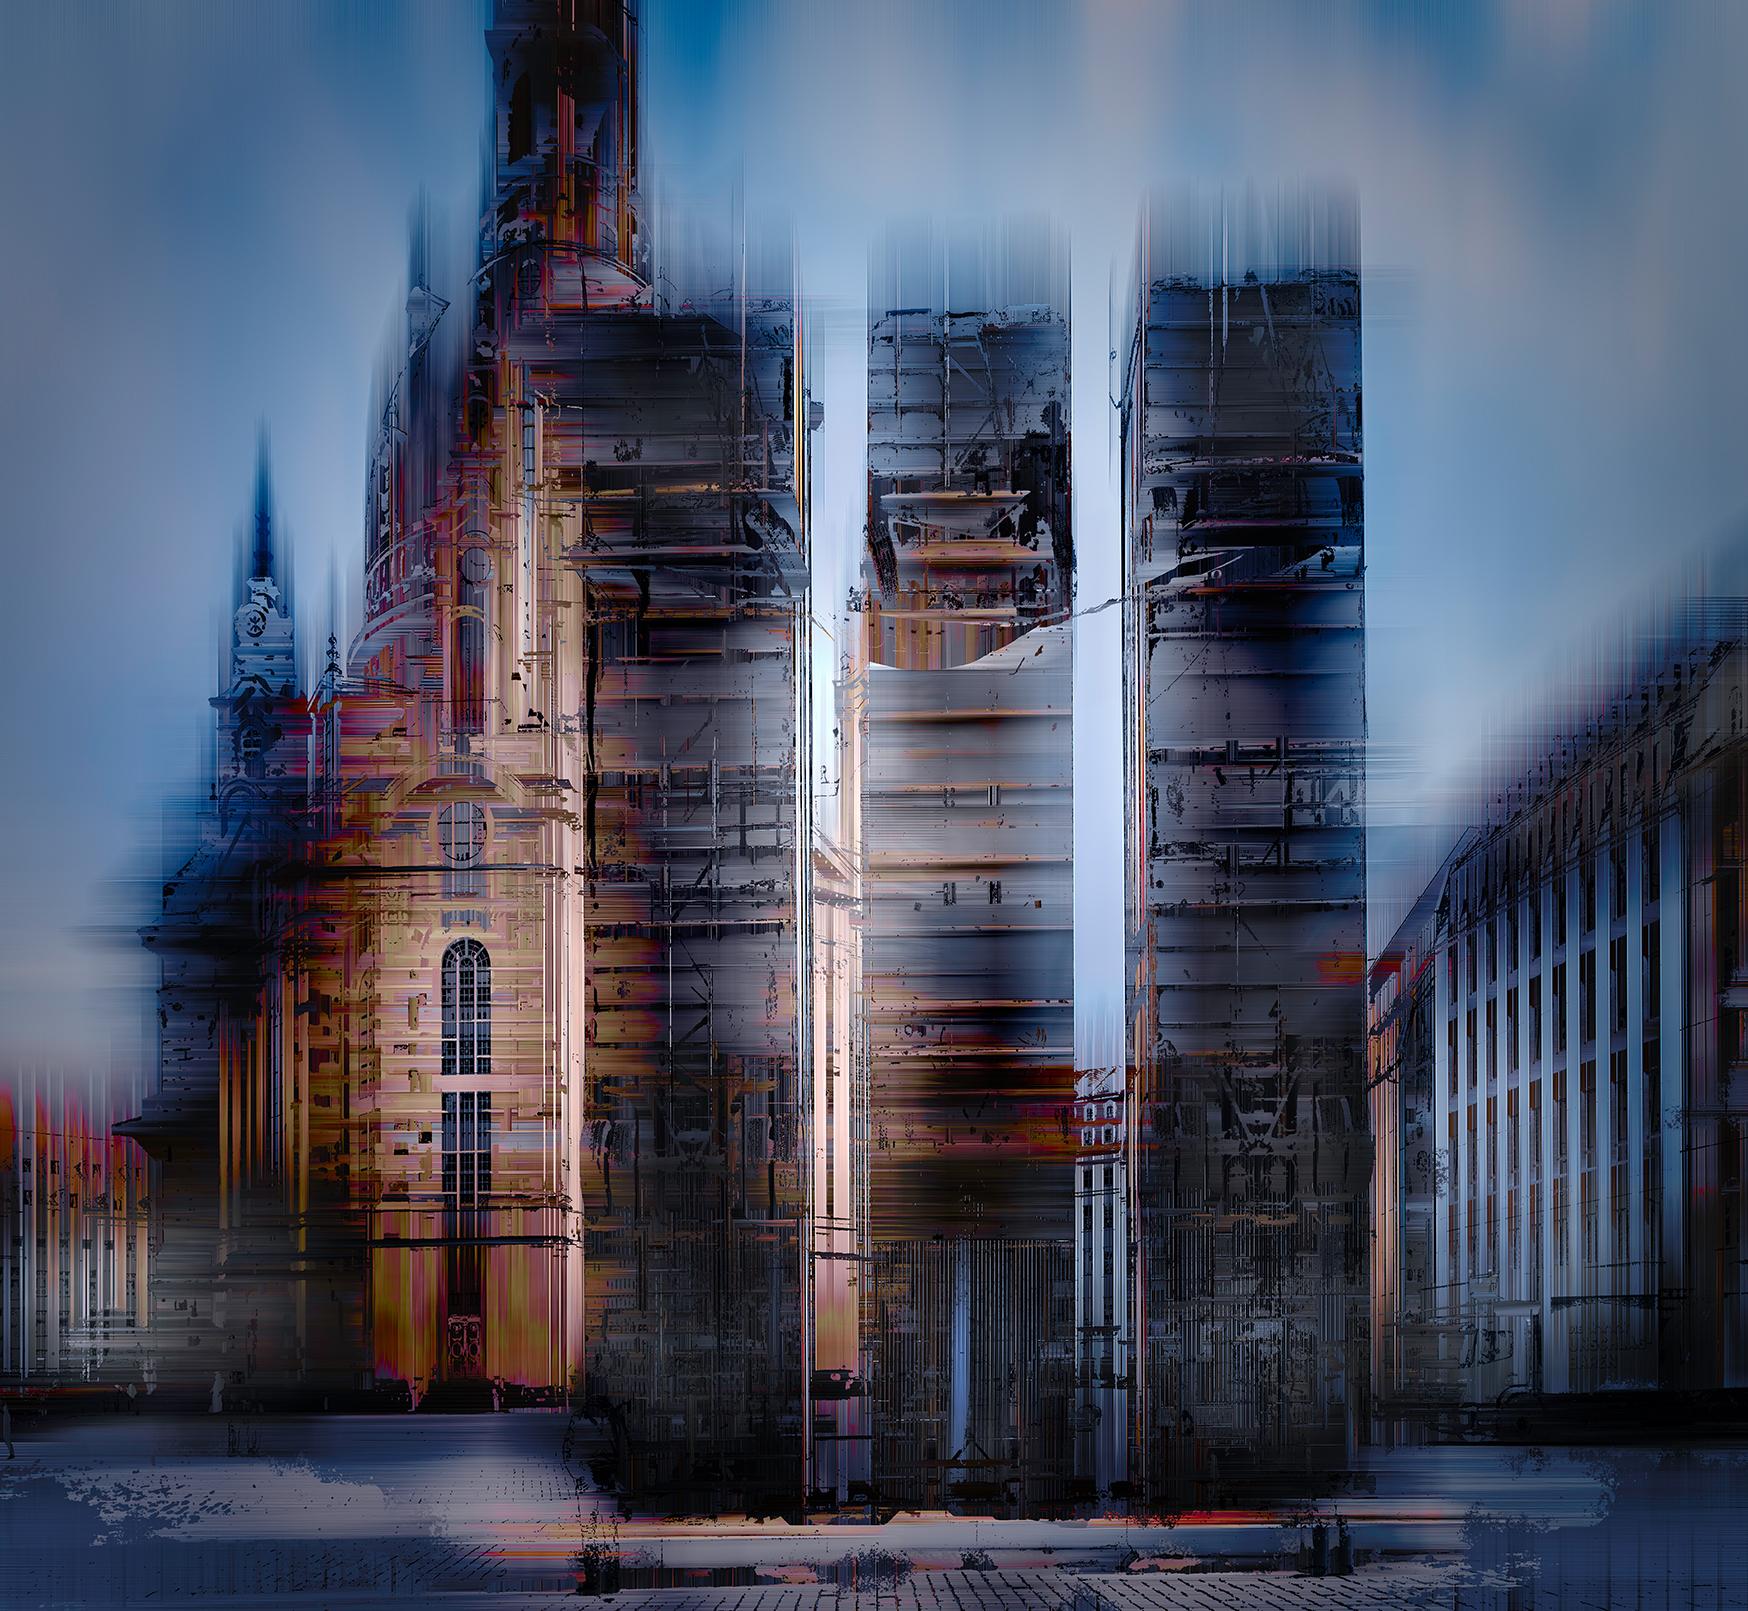 Jens-Christian Wittig Abstract Photograph - Church of the Ladies and Busses